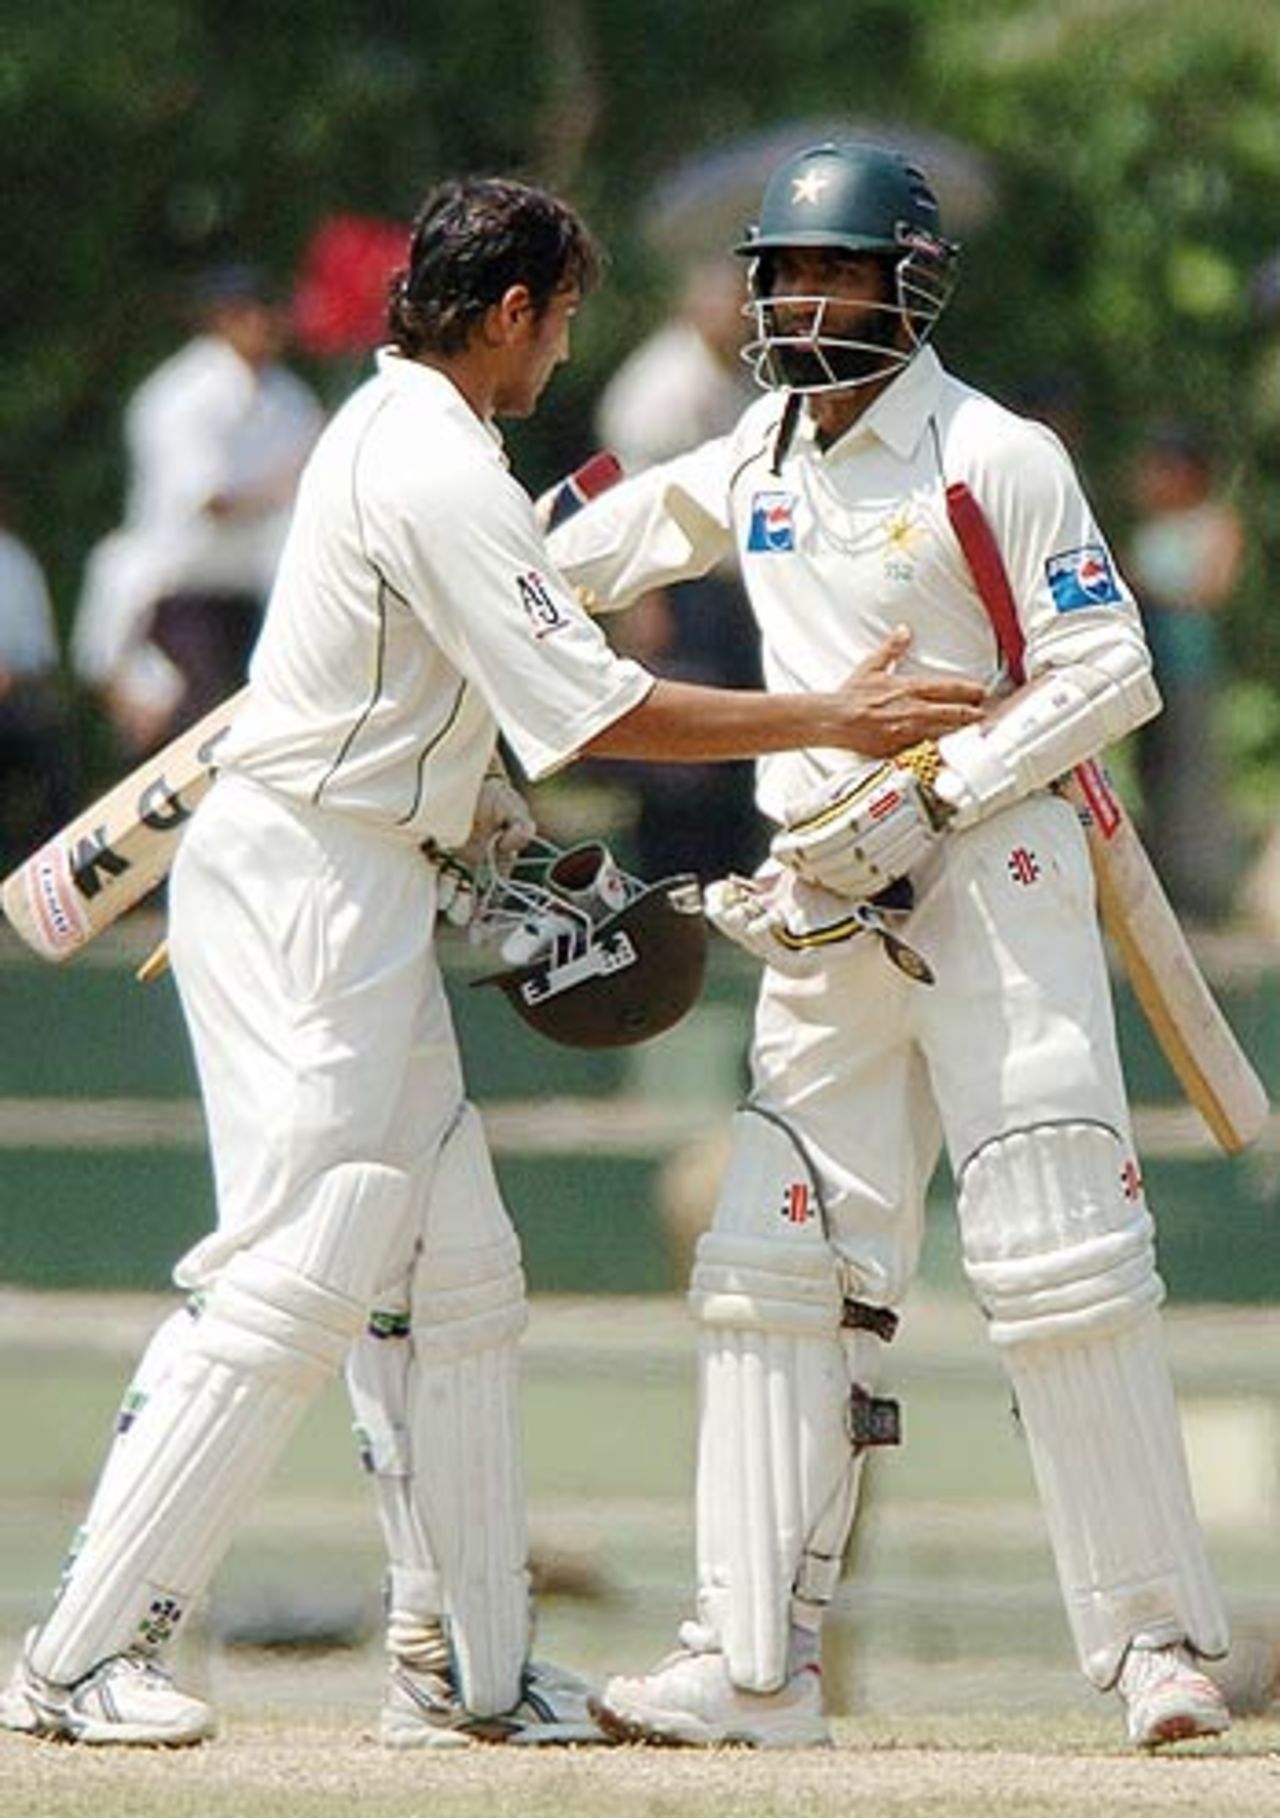 Younis Khan and Mohammad Yousuf congratulate each other after the winning runs, Sri Lanka v Pakistan, 2nd Test, Kandy, 3rd day, April 5, 2006